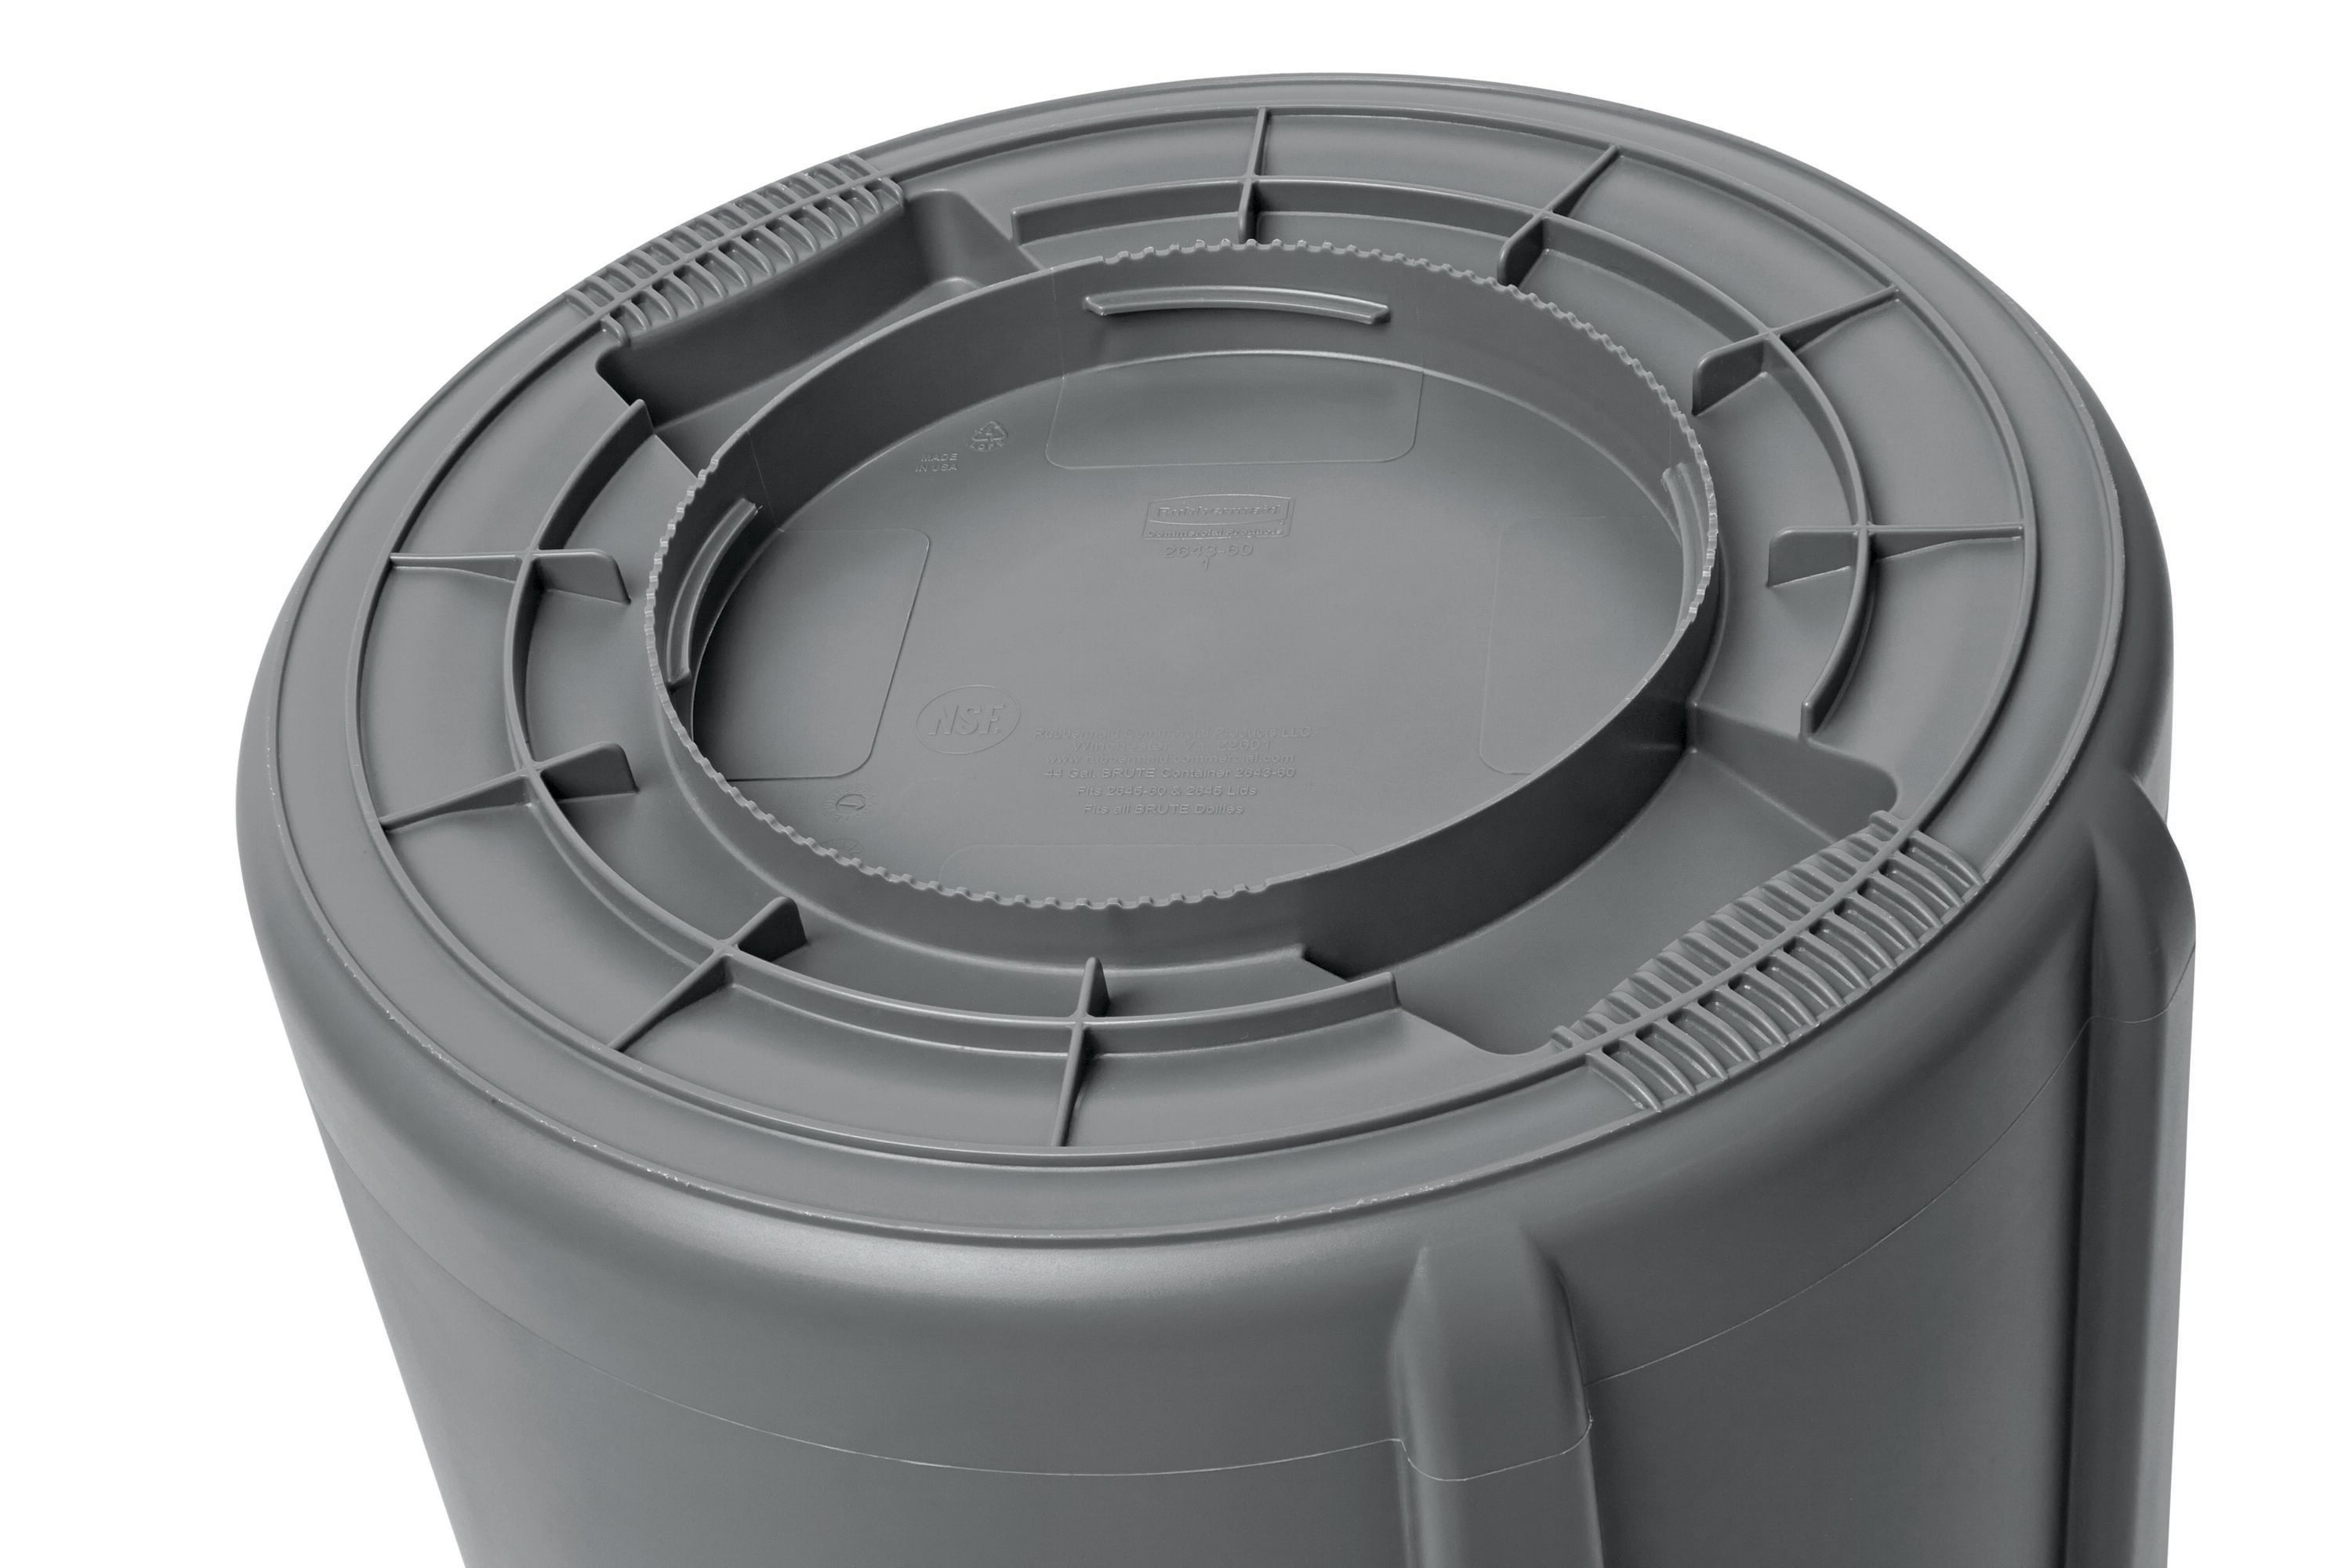 Rubbermaid BRUTE 20 Gallon Gray Round Trash Can and Lid